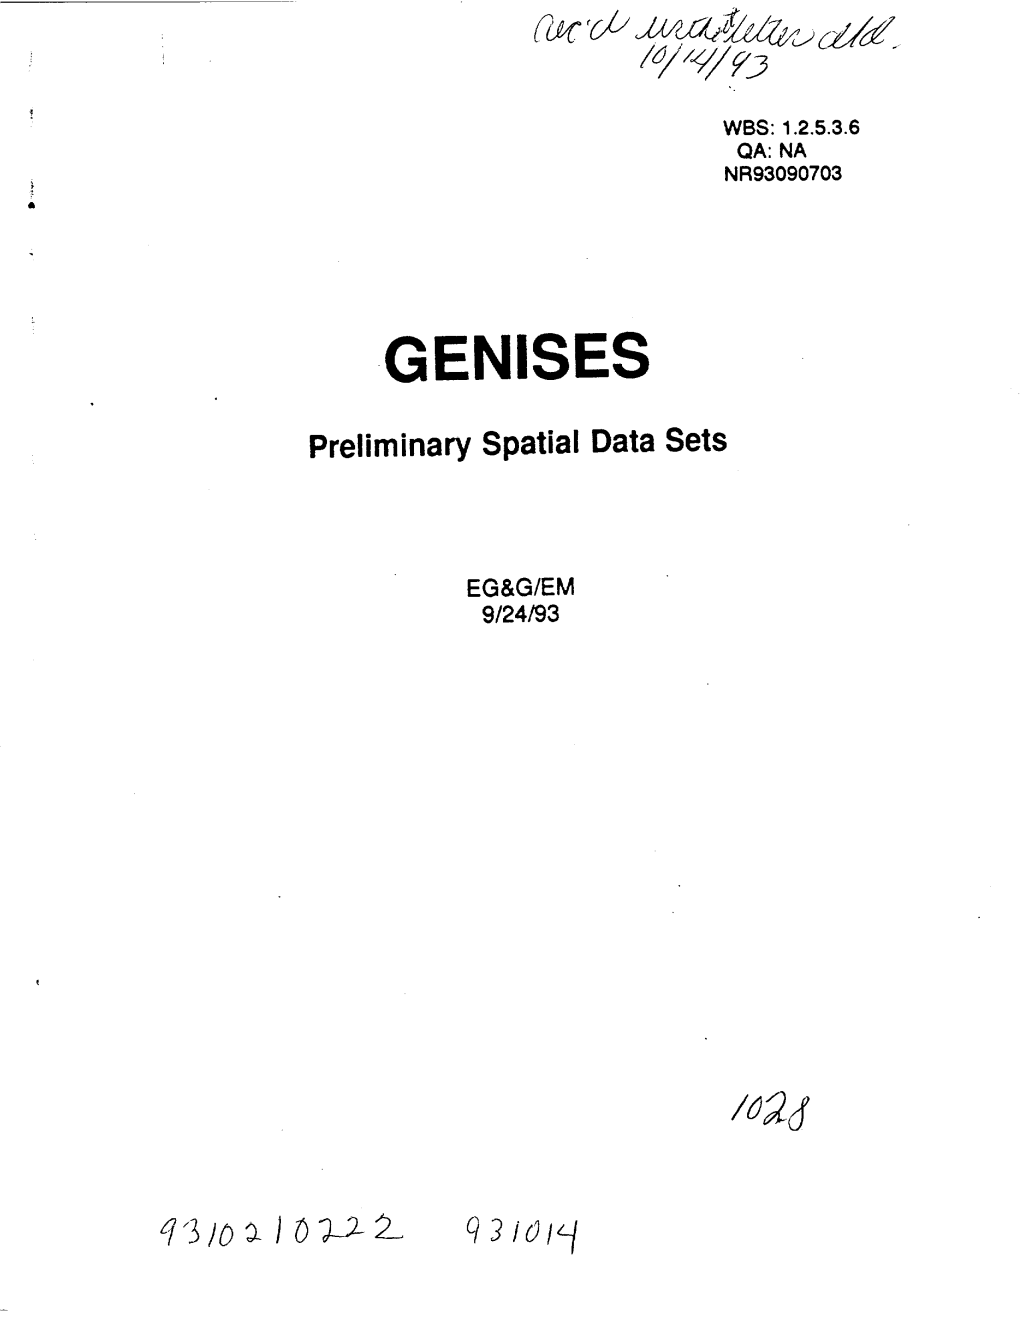 Genises Preliminary Spatial Data Sets